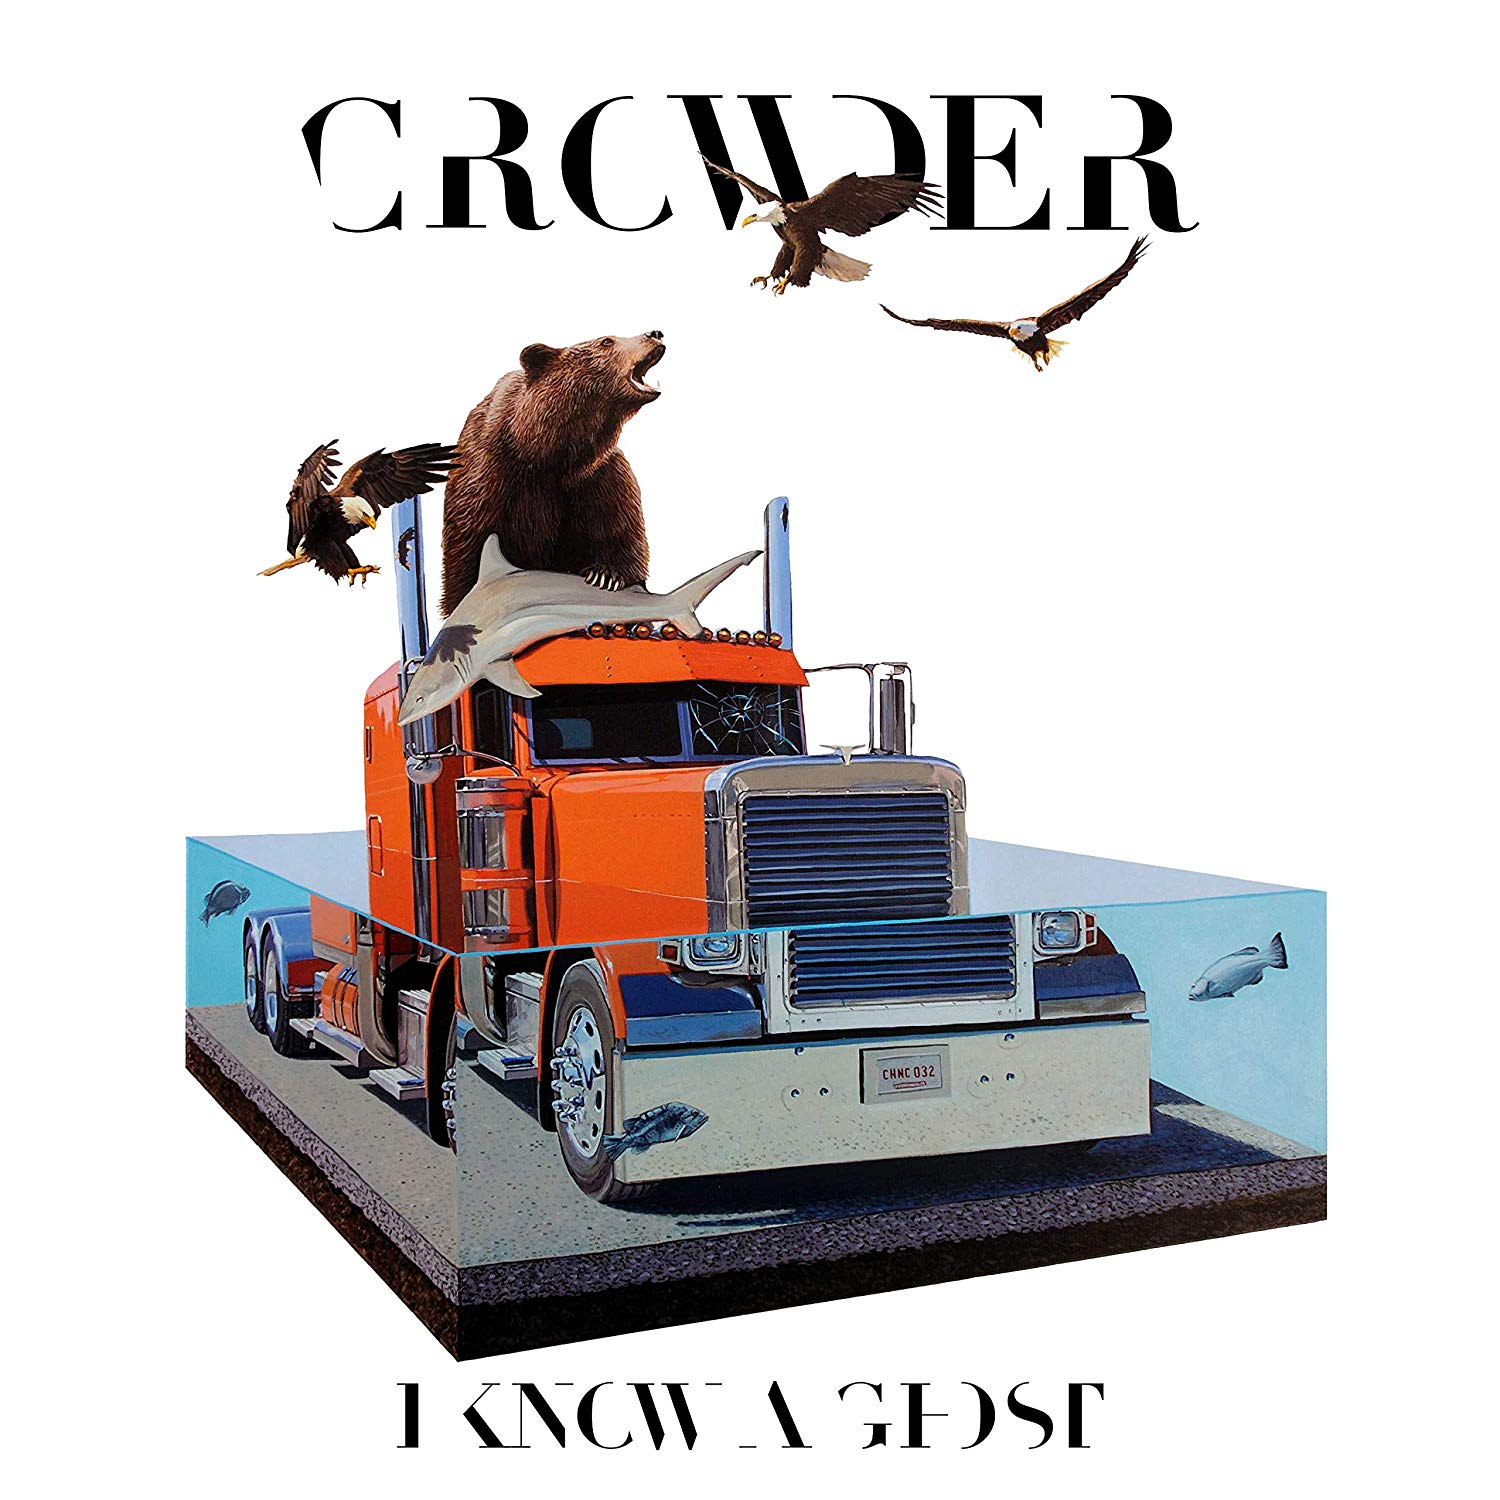 Red Letters - Crowder